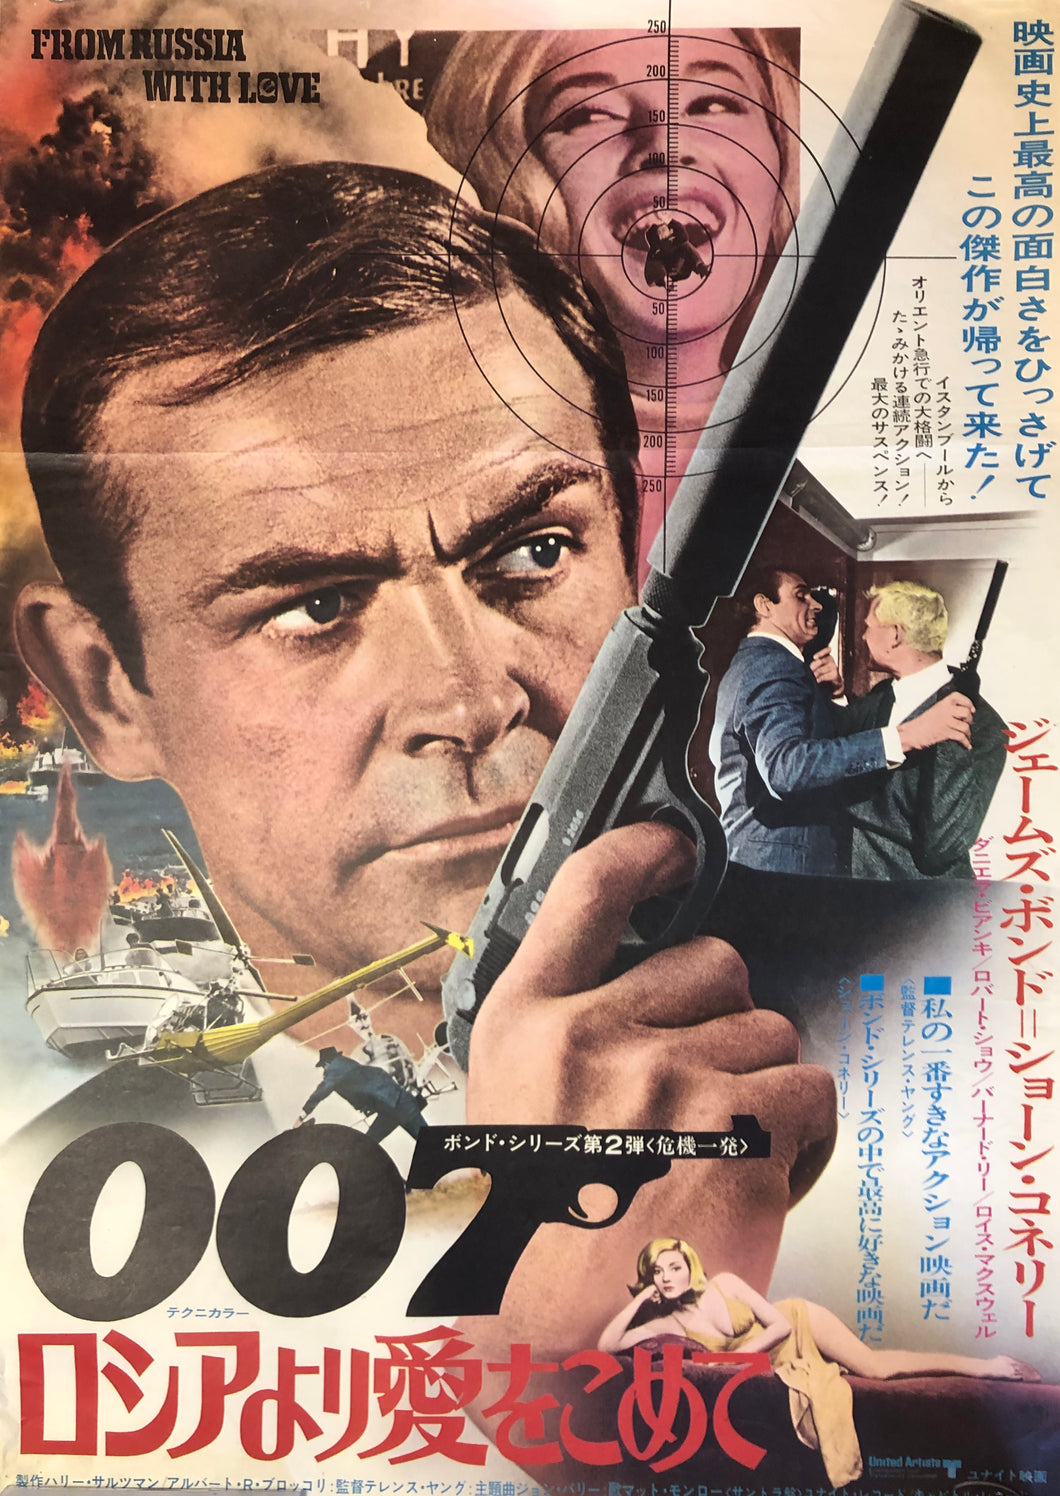 JAMES BOND FROM RUSSIA WITH LOVE JAPANESE MOVIE POSTER